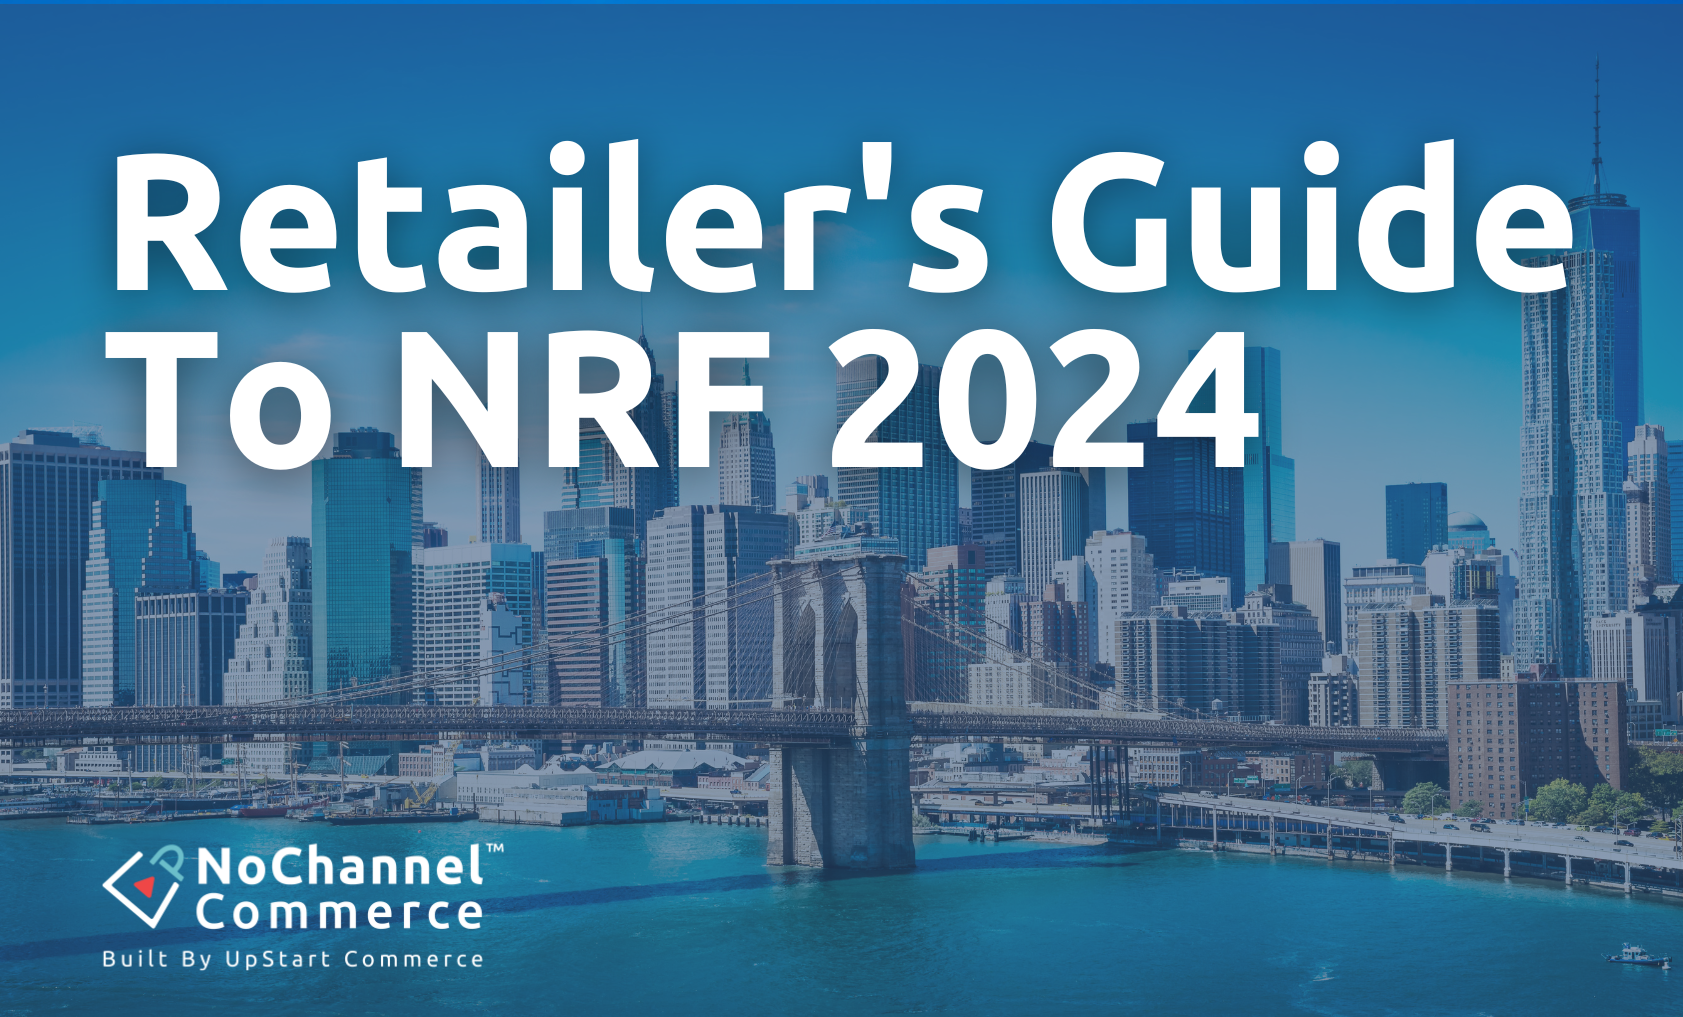 Retailer's Guide to NRF 2024 with NYC skyline in the background